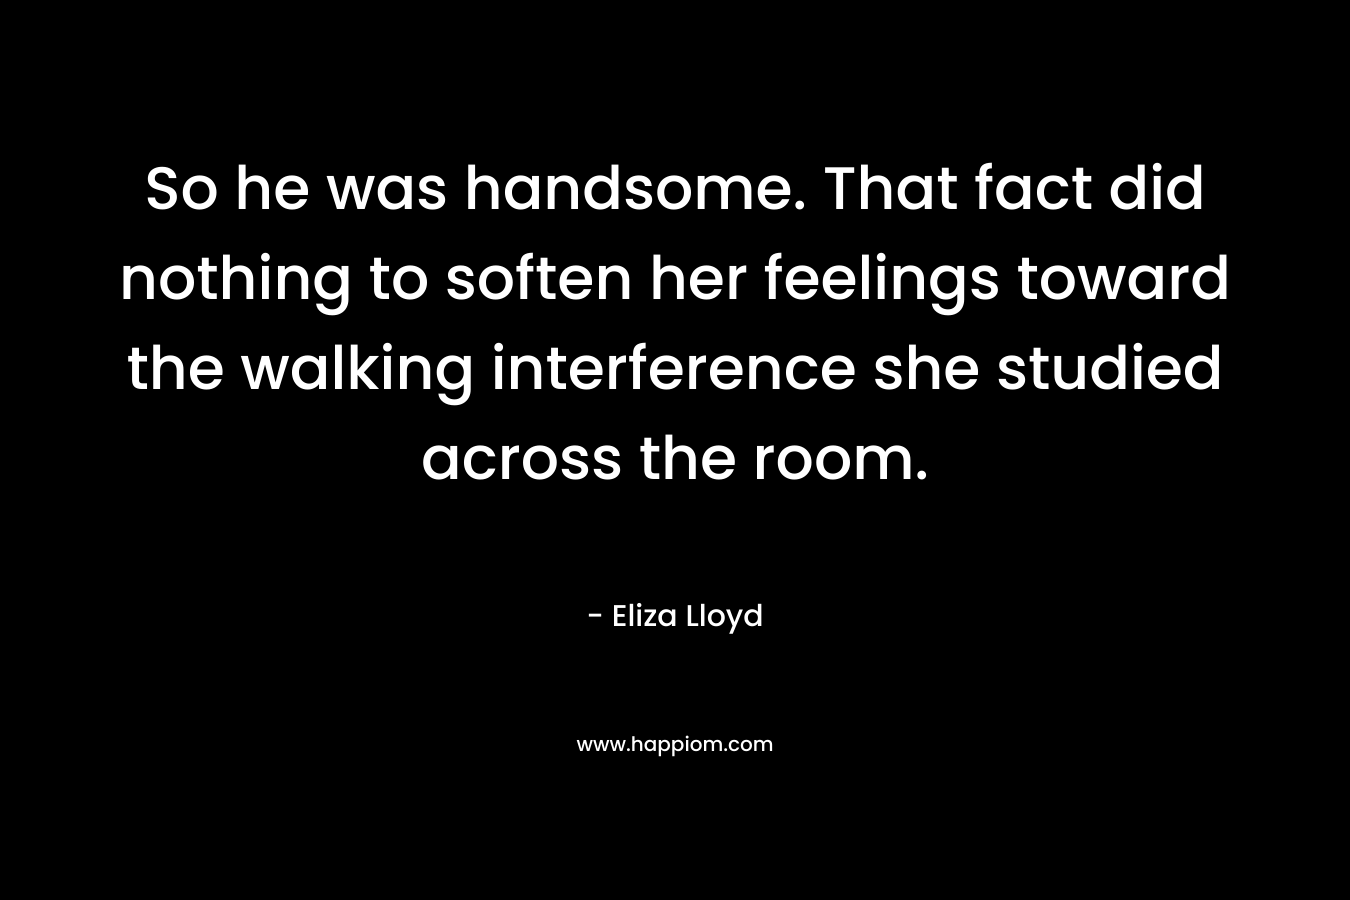 So he was handsome. That fact did nothing to soften her feelings toward the walking interference she studied across the room. – Eliza Lloyd